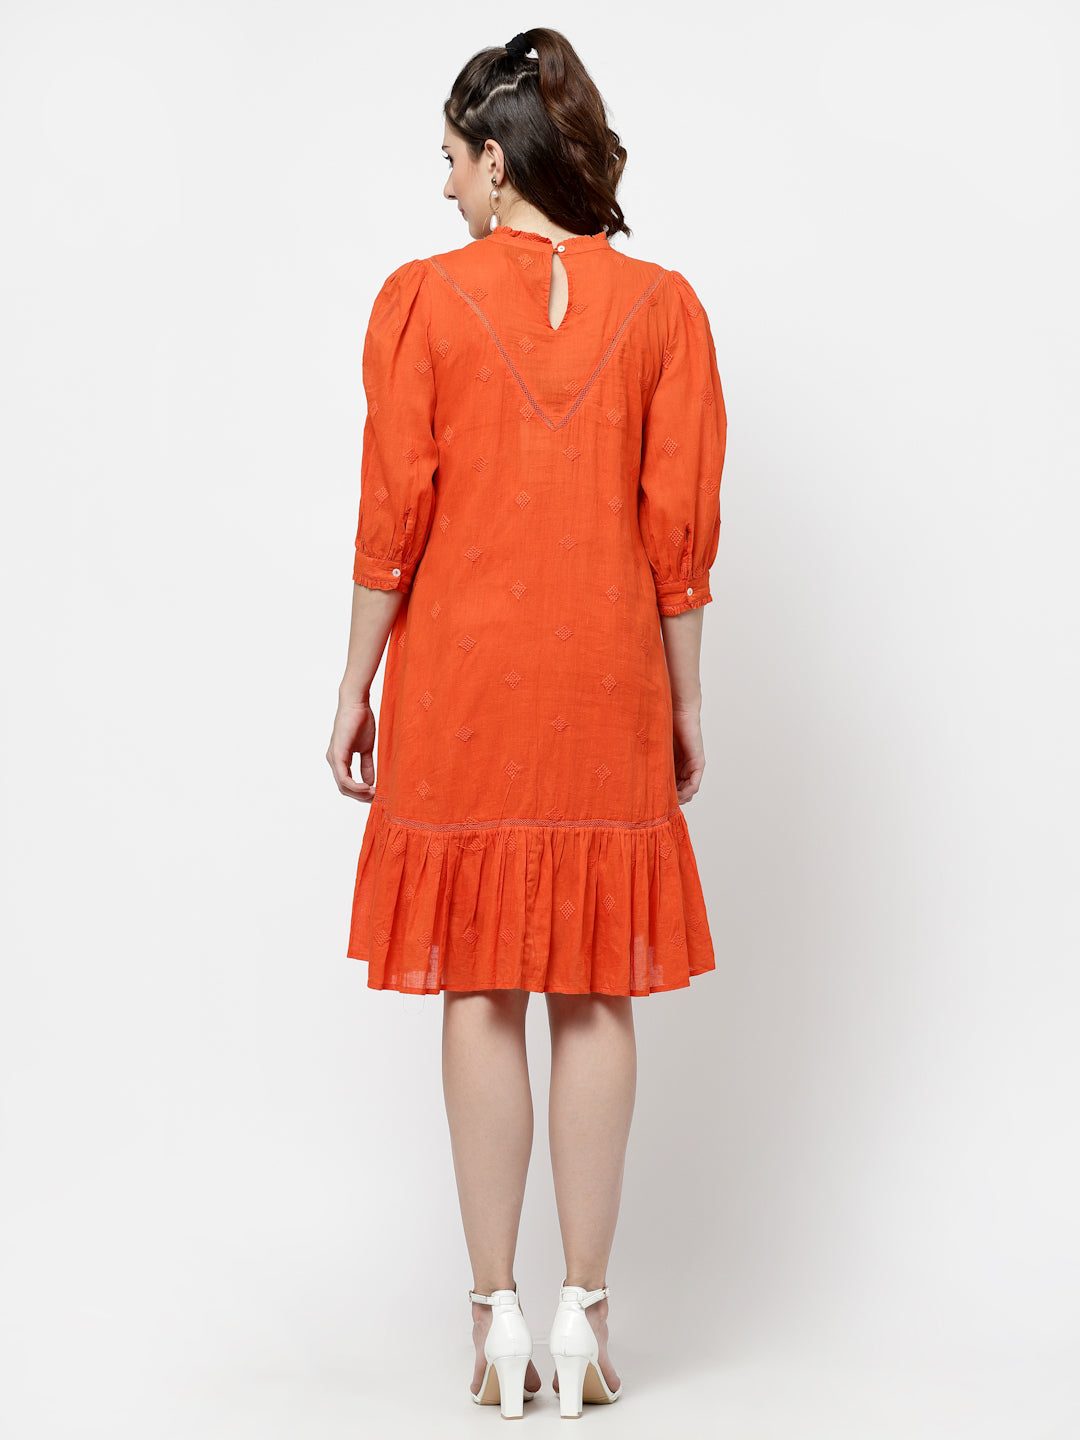 Terquois Stylish A-line Casual Dress Emblished with Lace and Has Ruffle Round Neck Dresses TERQUOIS   